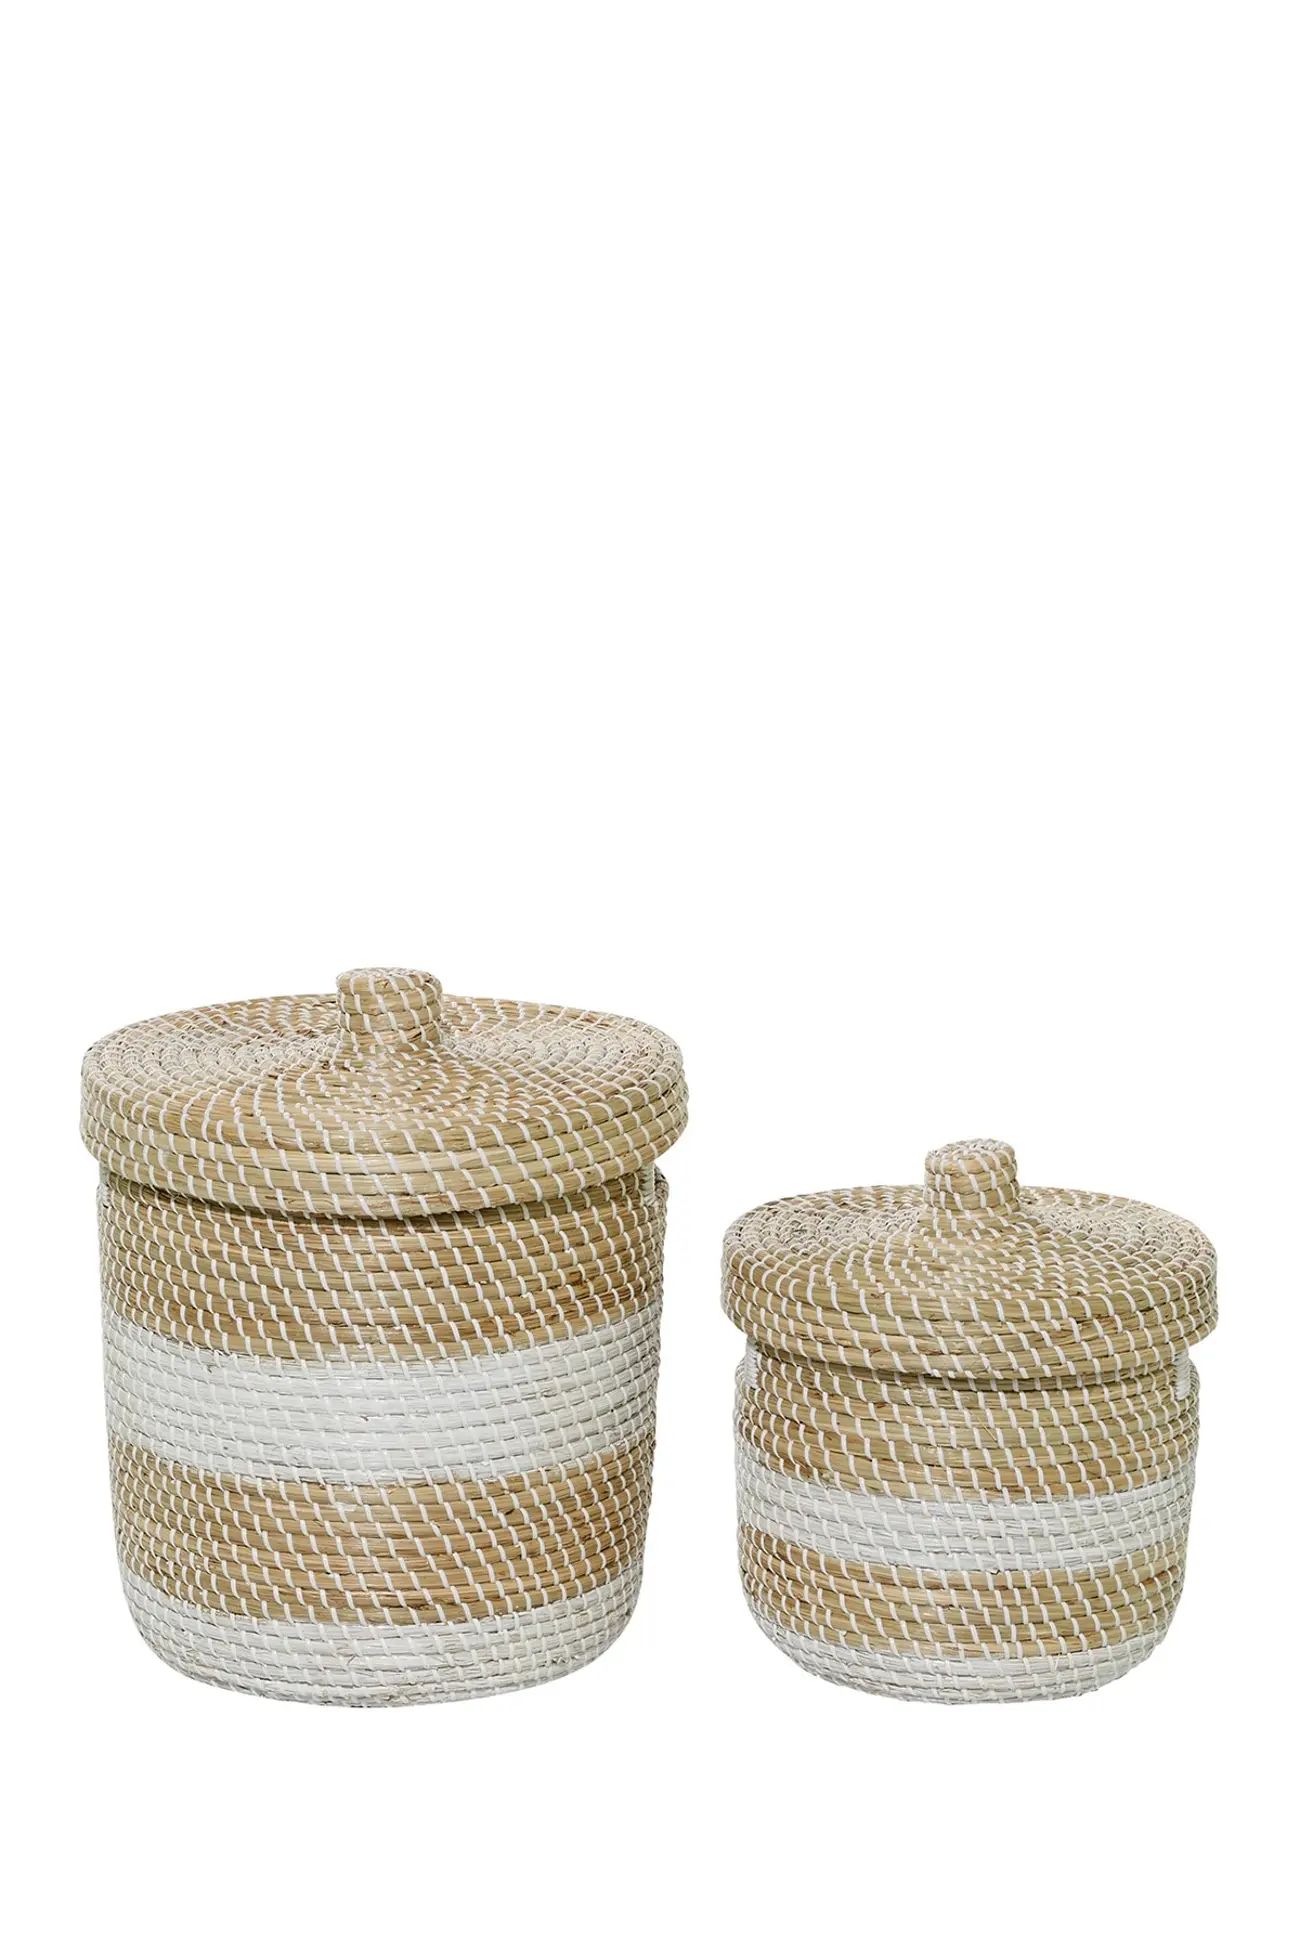 Willow Row | Small White And Natural Woven Striped Round Seagrass Basket with Lid - Set of 2 | No... | Nordstrom Rack